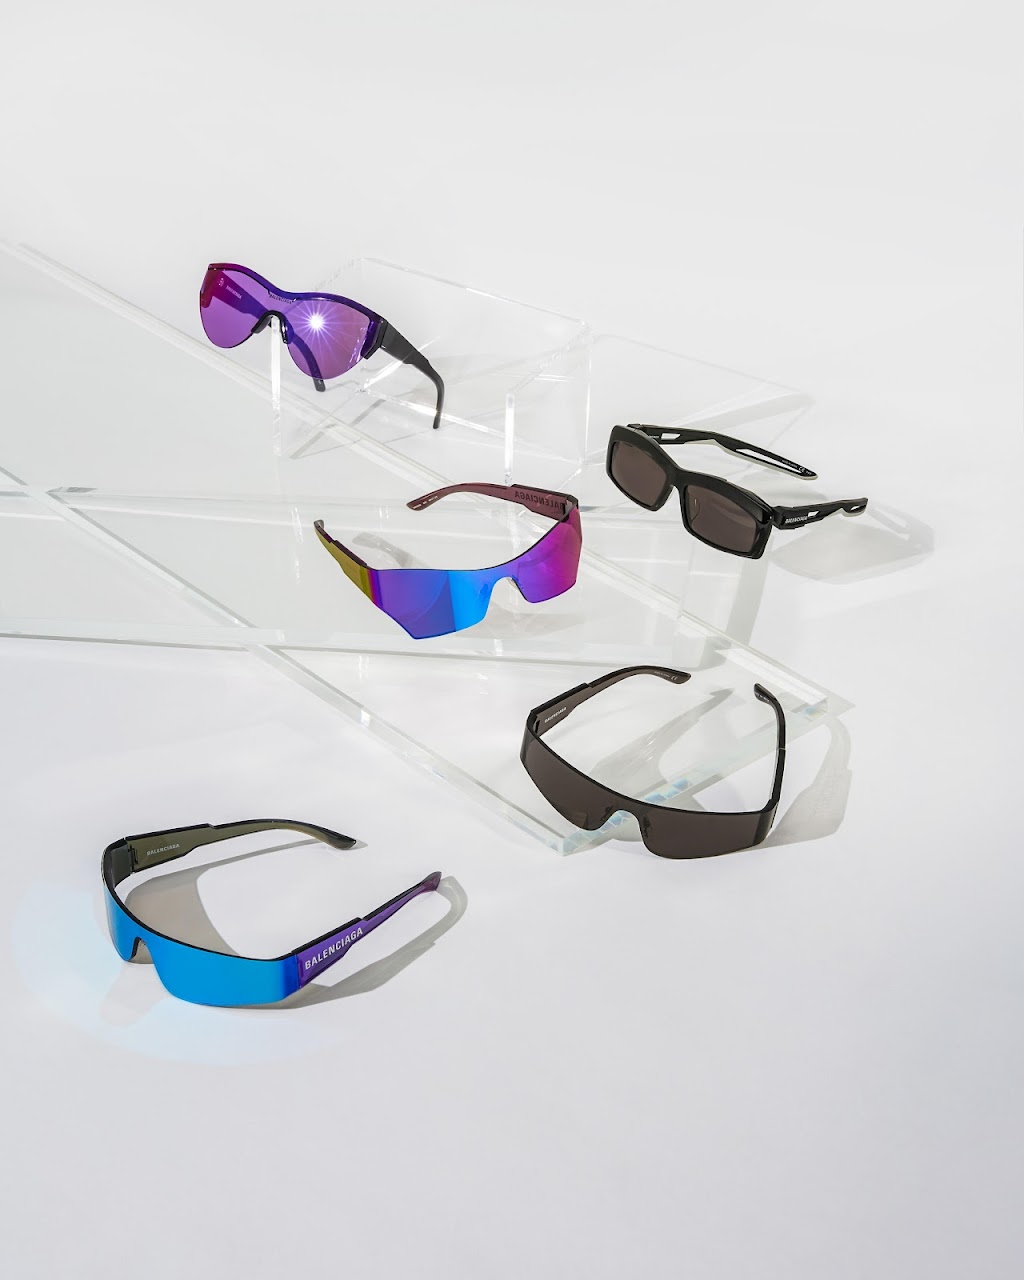 Solstice Sunglasses | 447 Great Mall Dr Space 516, Milpitas, CA 95035 | Phone: (408) 601-4001